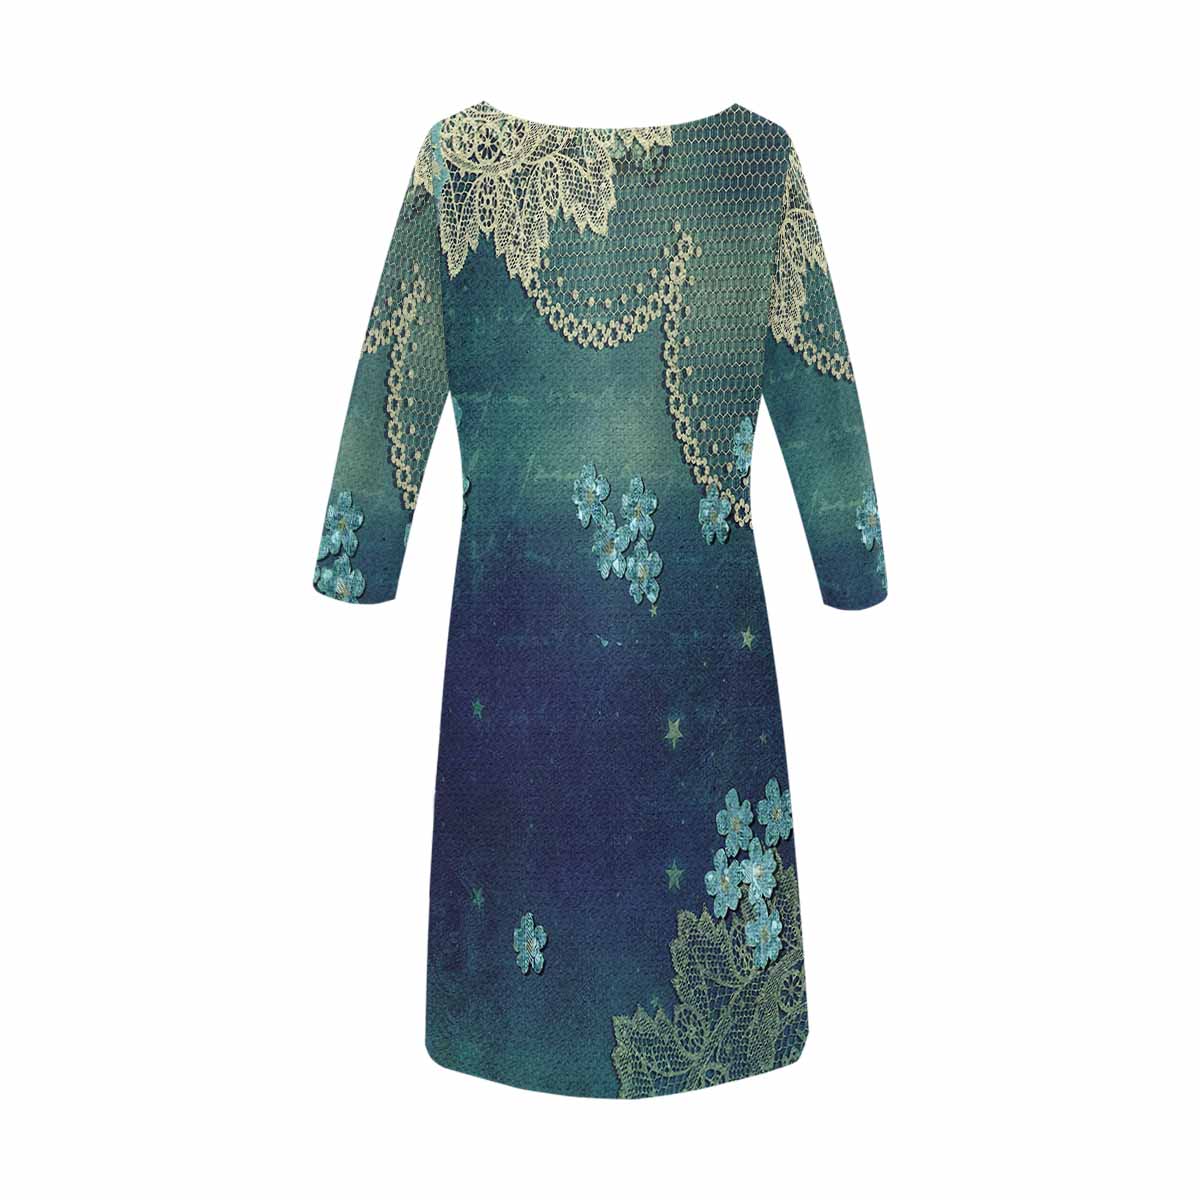 Victorian printed lace loose dress, Design 04